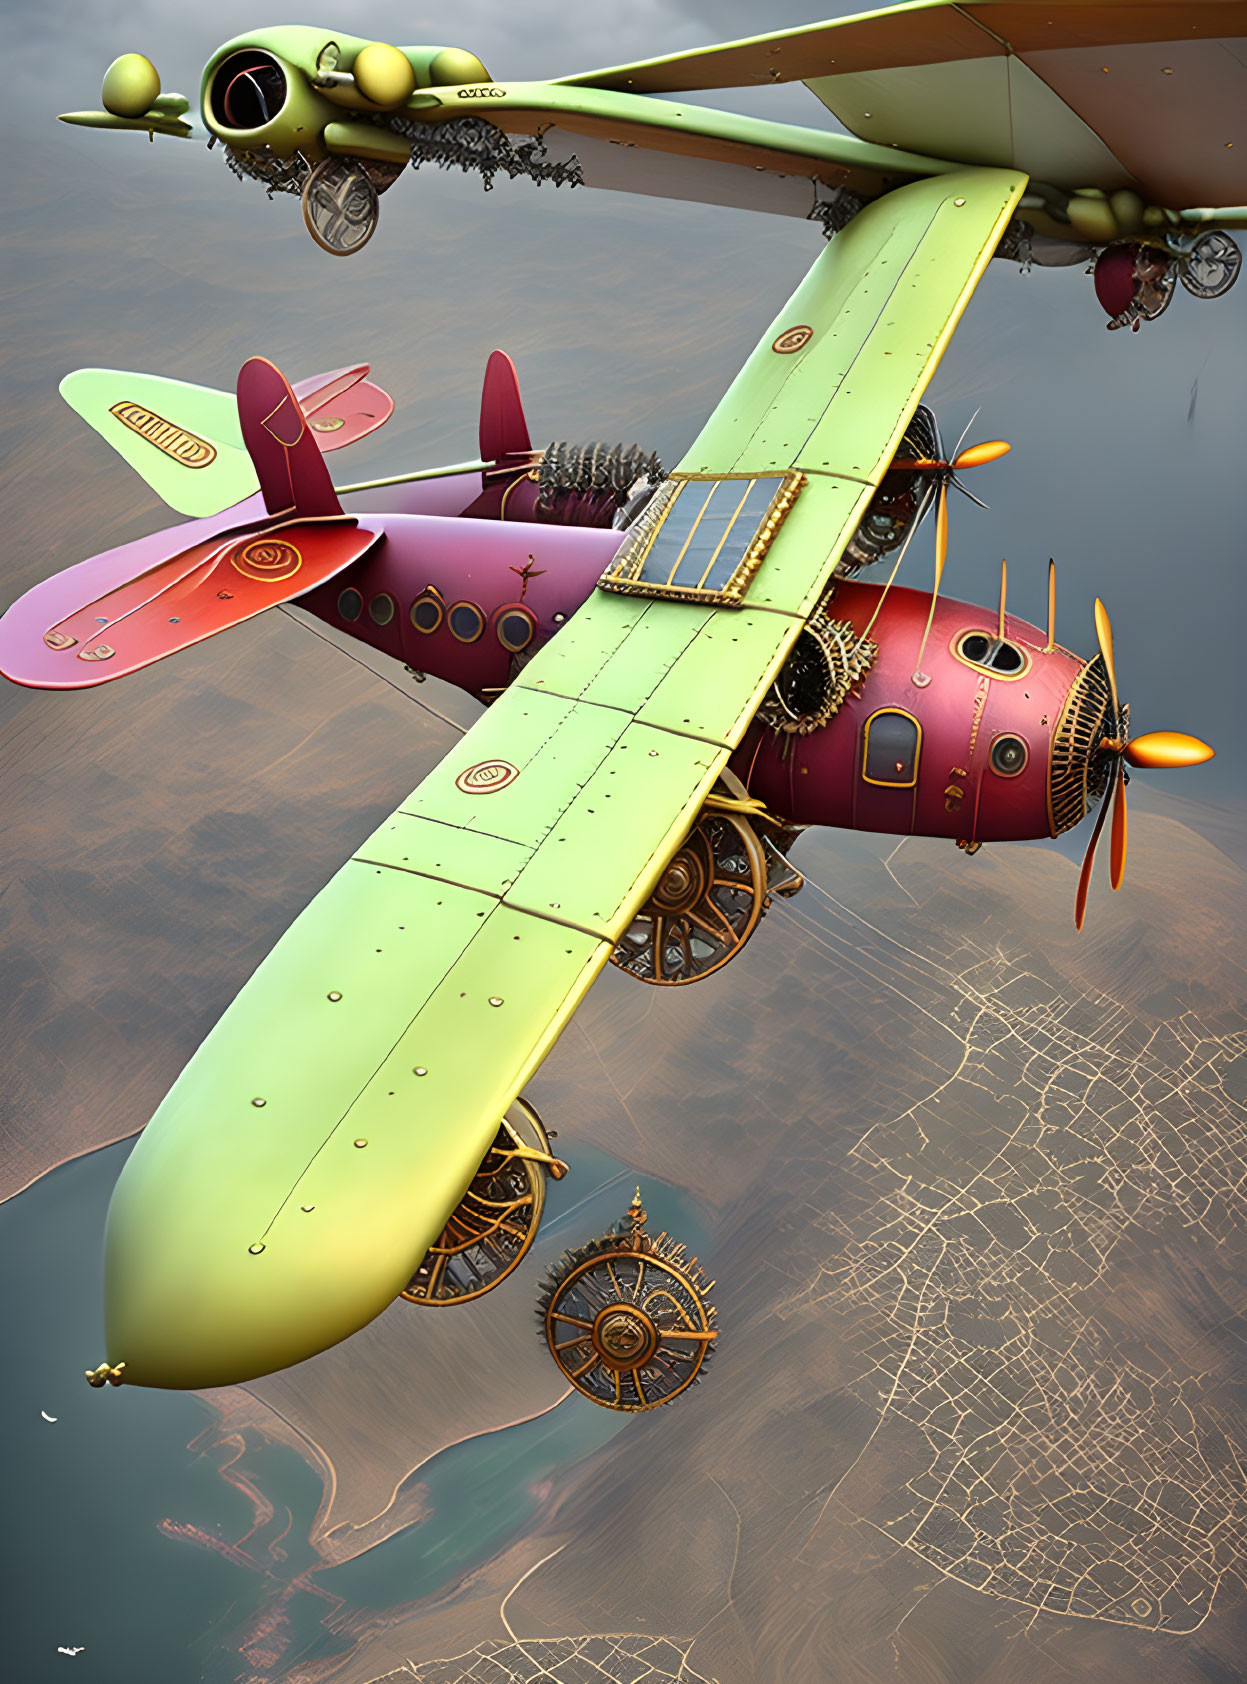 Steampunk-style aircraft with gears and propellers above map-like background